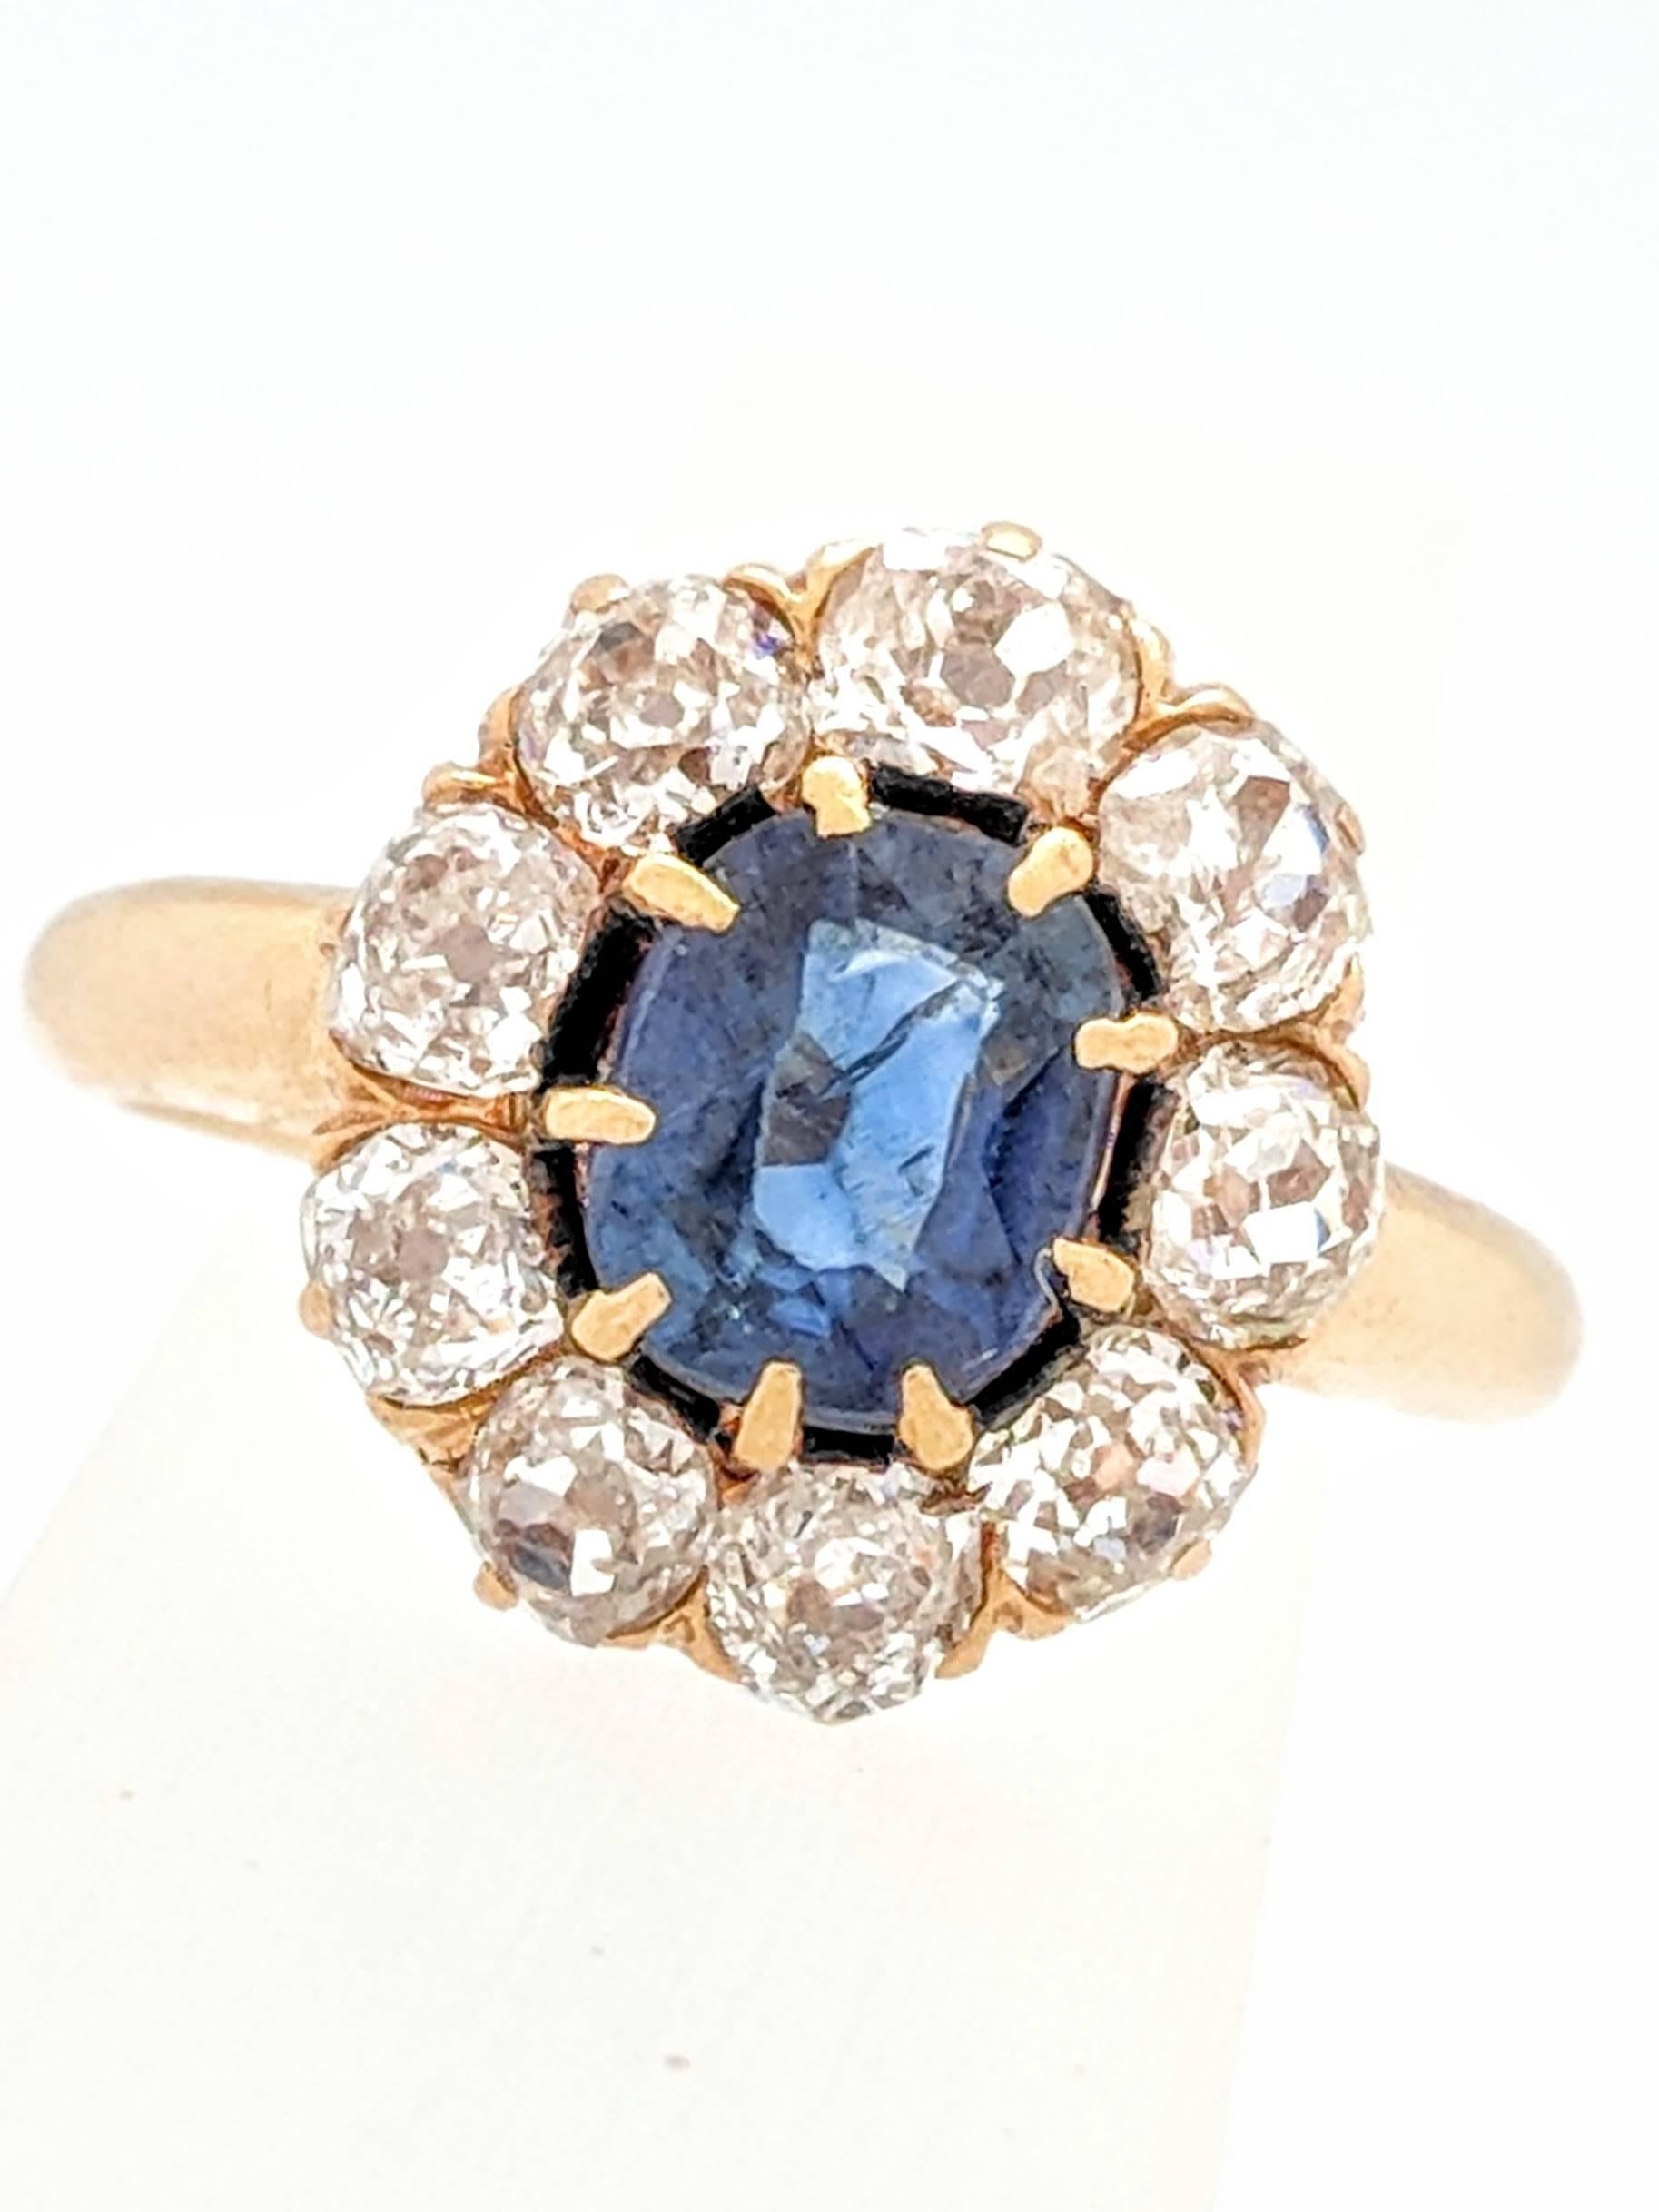 Ladies 14k Yellow Gold 2.35ctw Sapphire & Diamond Estate Ring Size 6

You are viewing a beautiful sapphire and diamond estate ring. Any woman would love to add this piece to their collection! This ring is crafted from 14k yellow gold and weighs 4.5